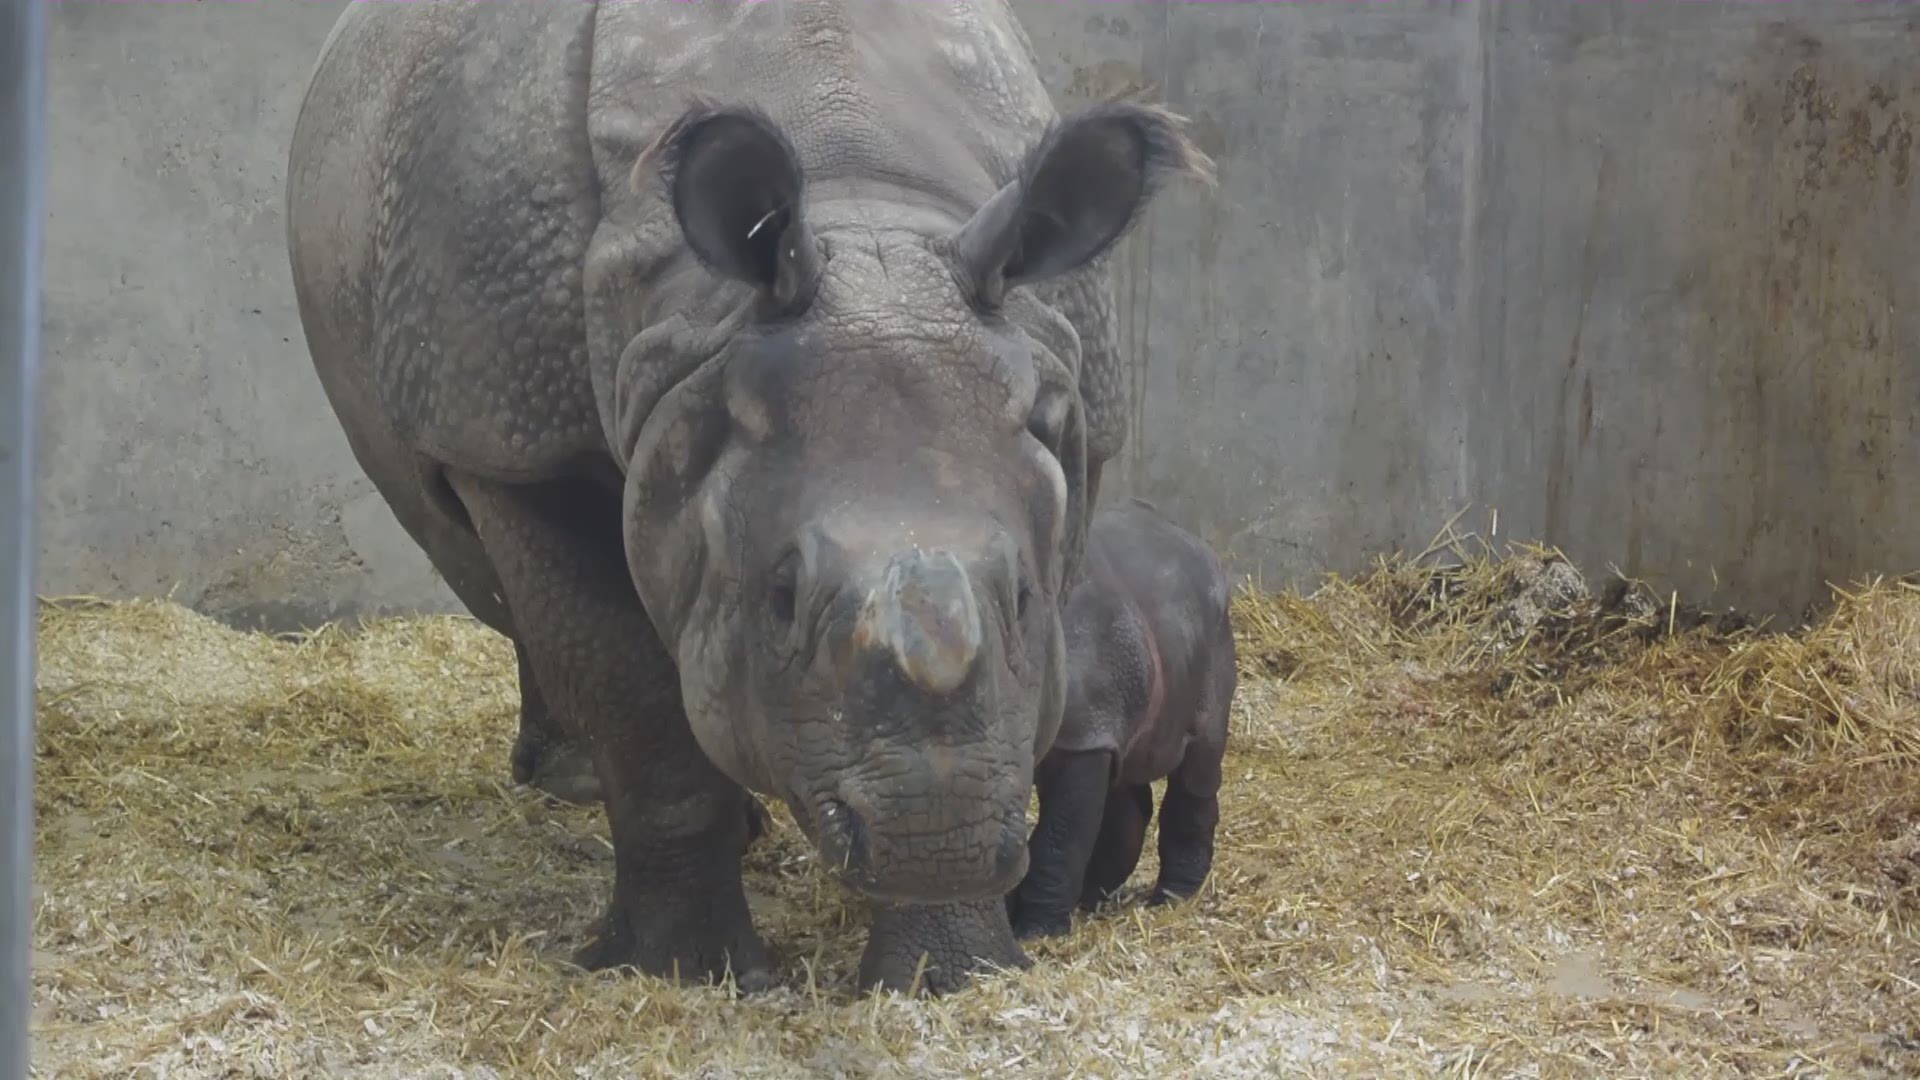 The Denver Zoo announced Tensing, a Greater One-Horned Rhino, gave birth to a calf on Saturday morning.